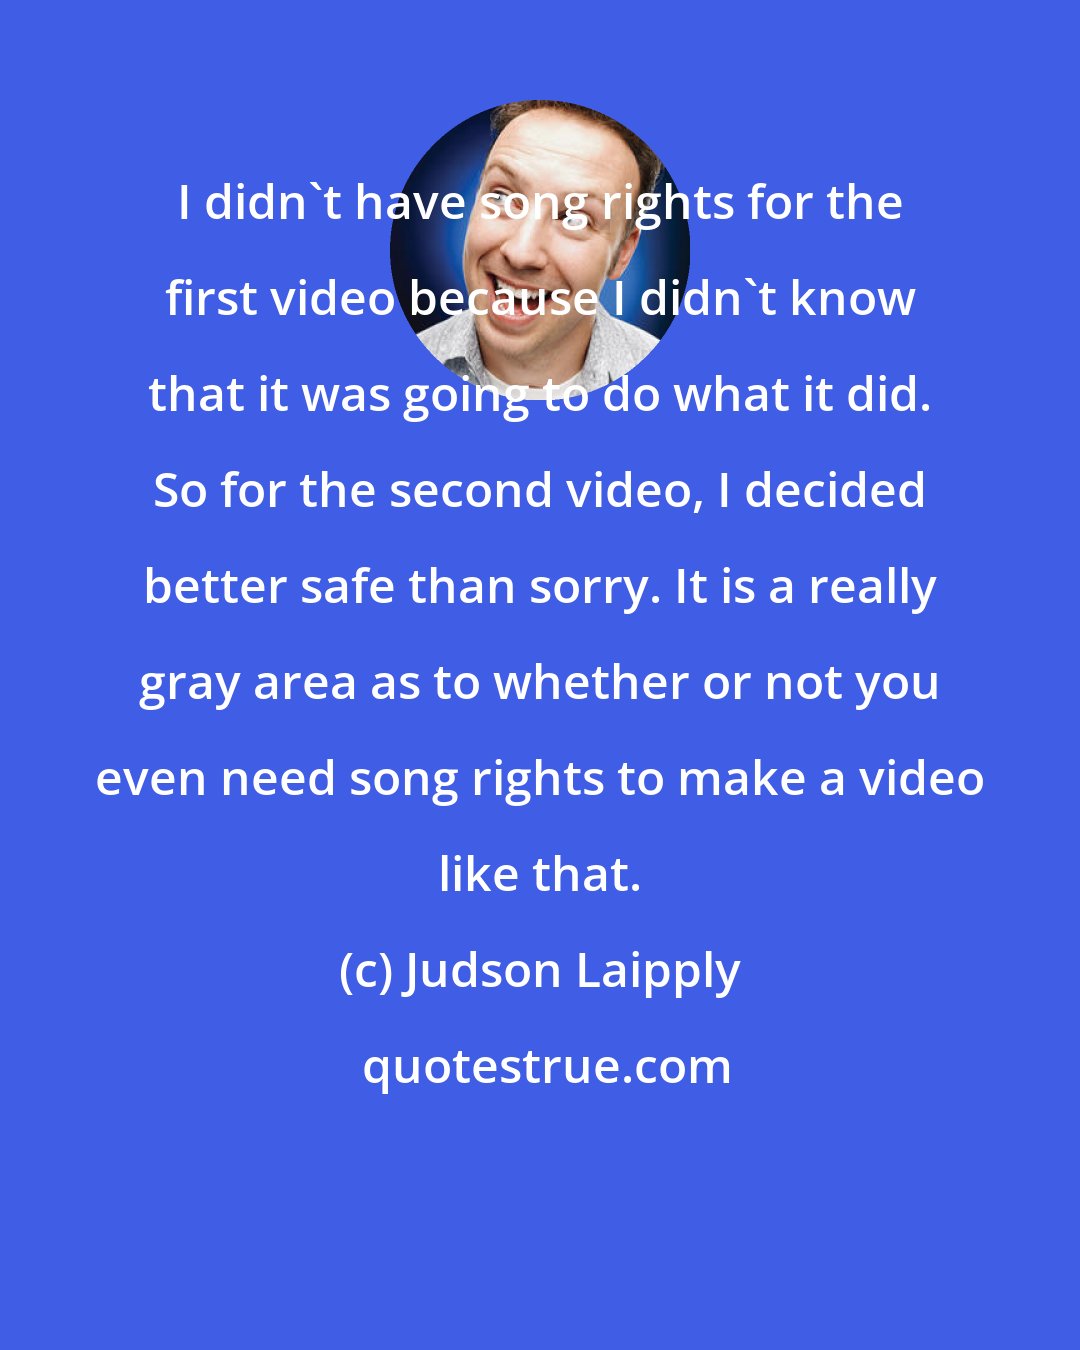 Judson Laipply: I didn't have song rights for the first video because I didn't know that it was going to do what it did. So for the second video, I decided better safe than sorry. It is a really gray area as to whether or not you even need song rights to make a video like that.